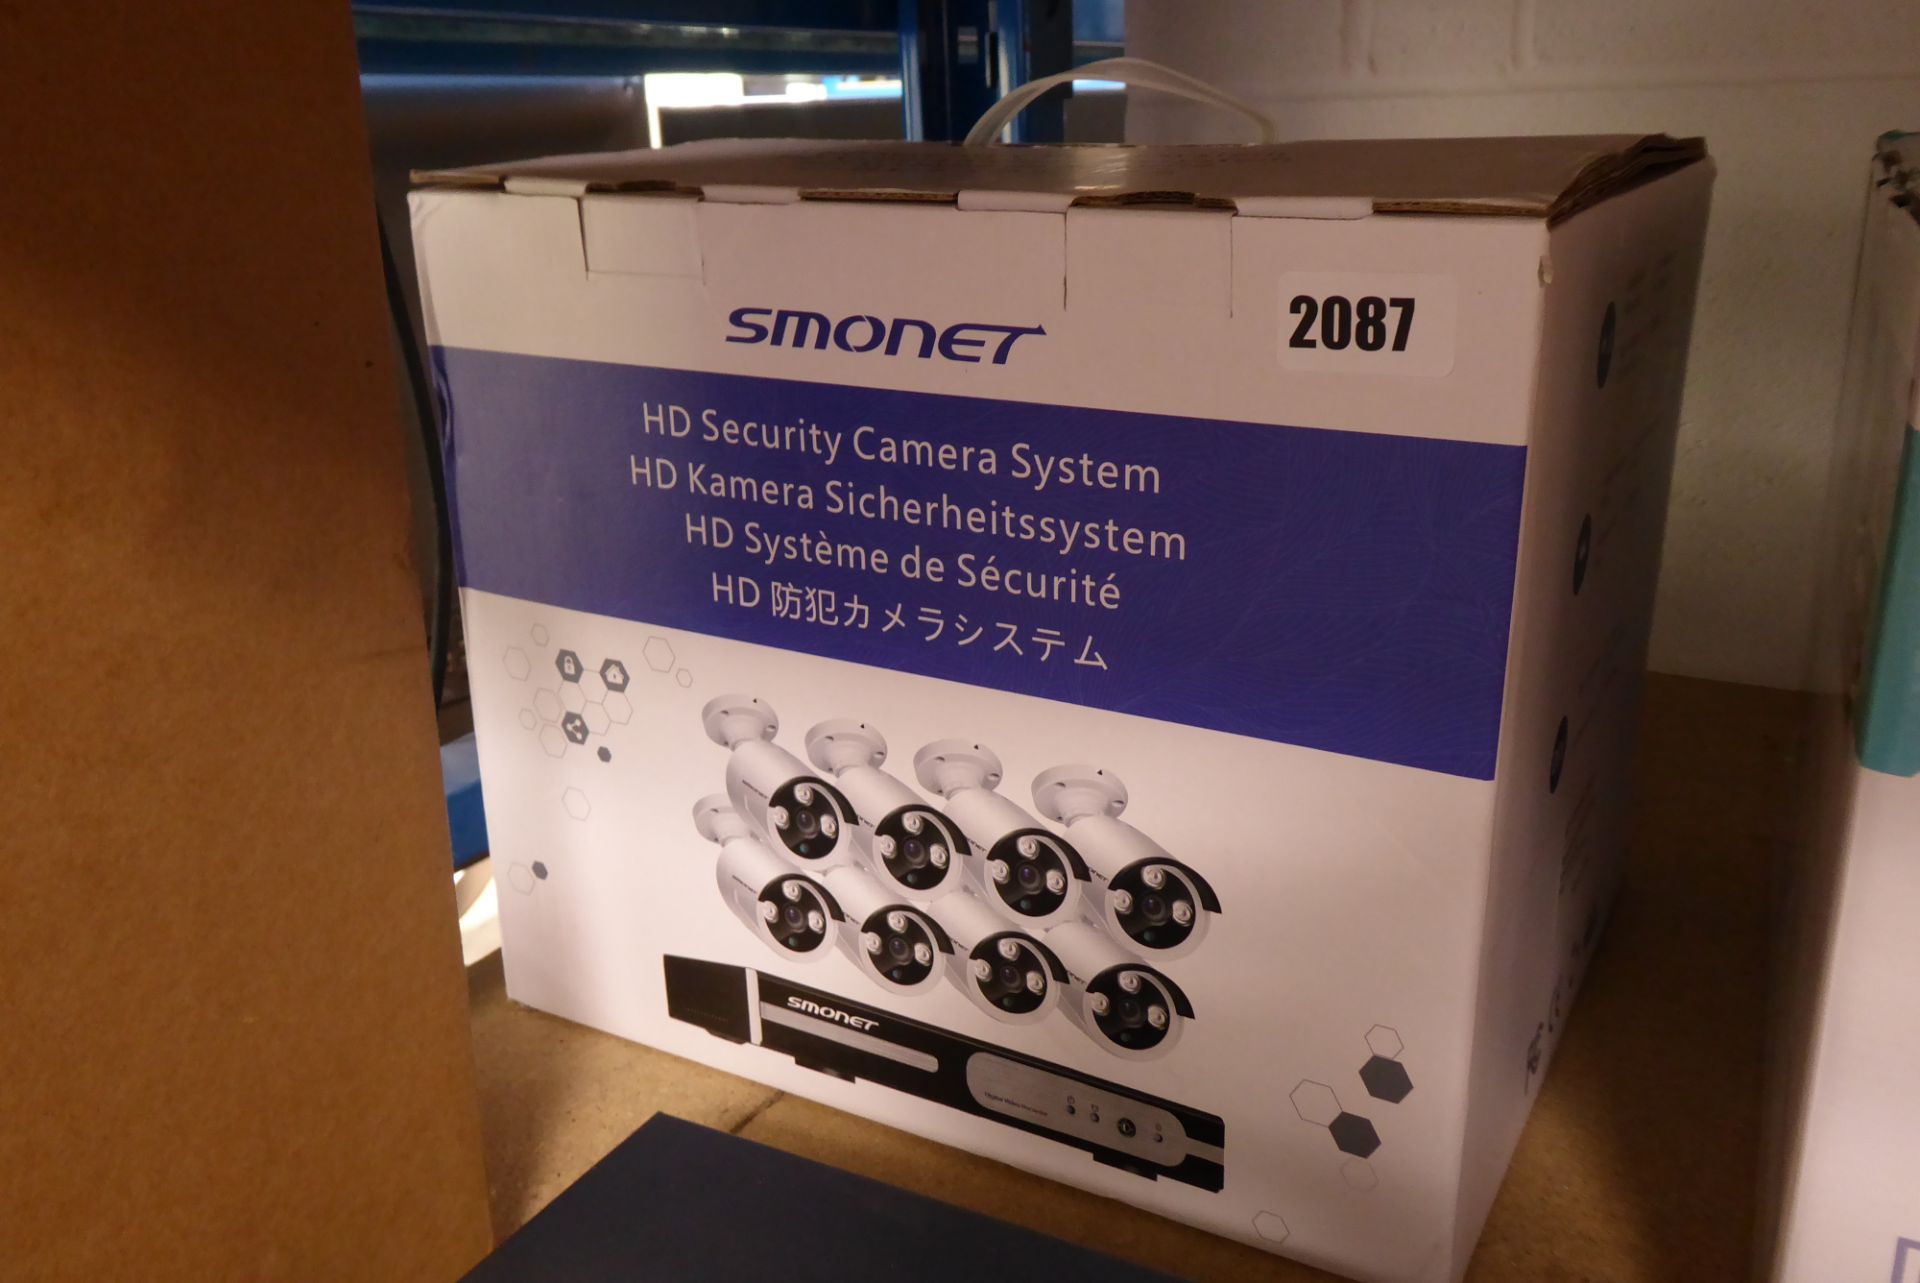 Smonet HD security camera system in box